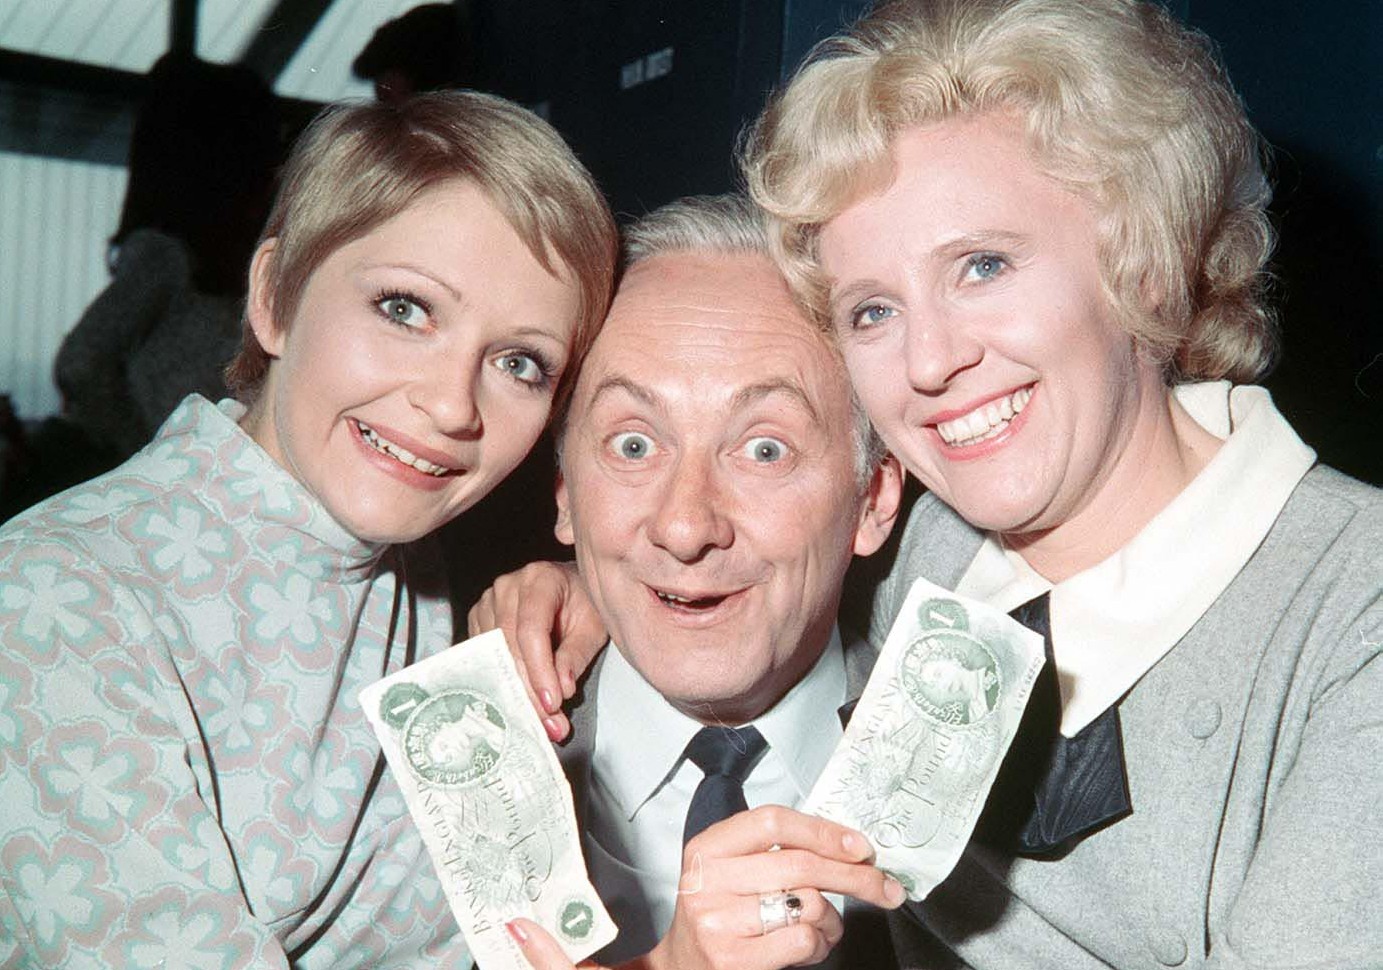 Presenters Of Double Your Money: Monica Rose, Hughie Green and Audrey Graham (Left-to-right) presented Double Your Money